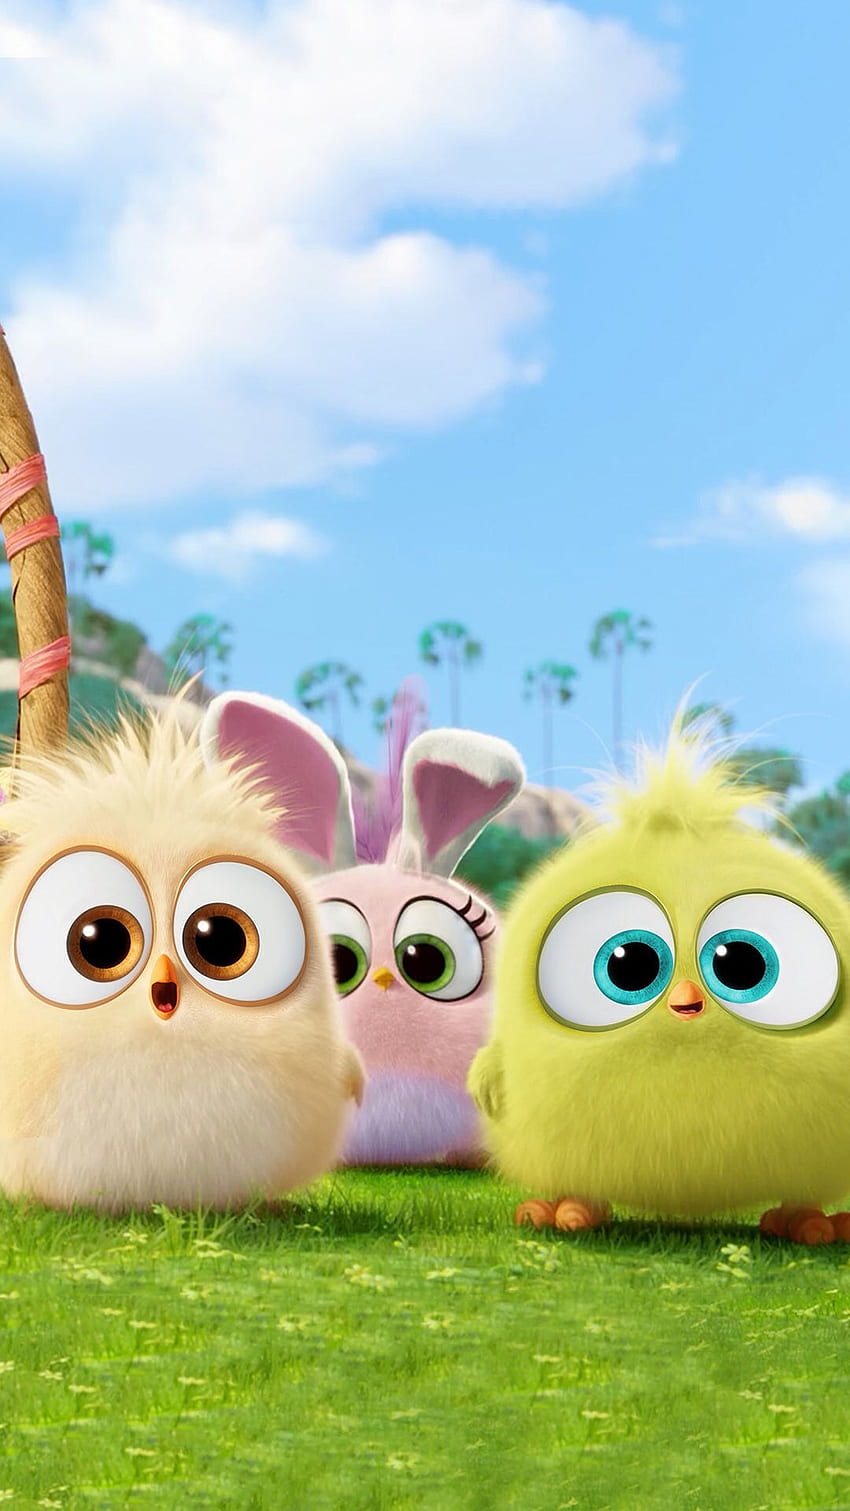 Hatchlings Angry Birds ideas in 2021. angry birds, angry birds movie, birds, Cute Angry Birds HD phone wallpaper